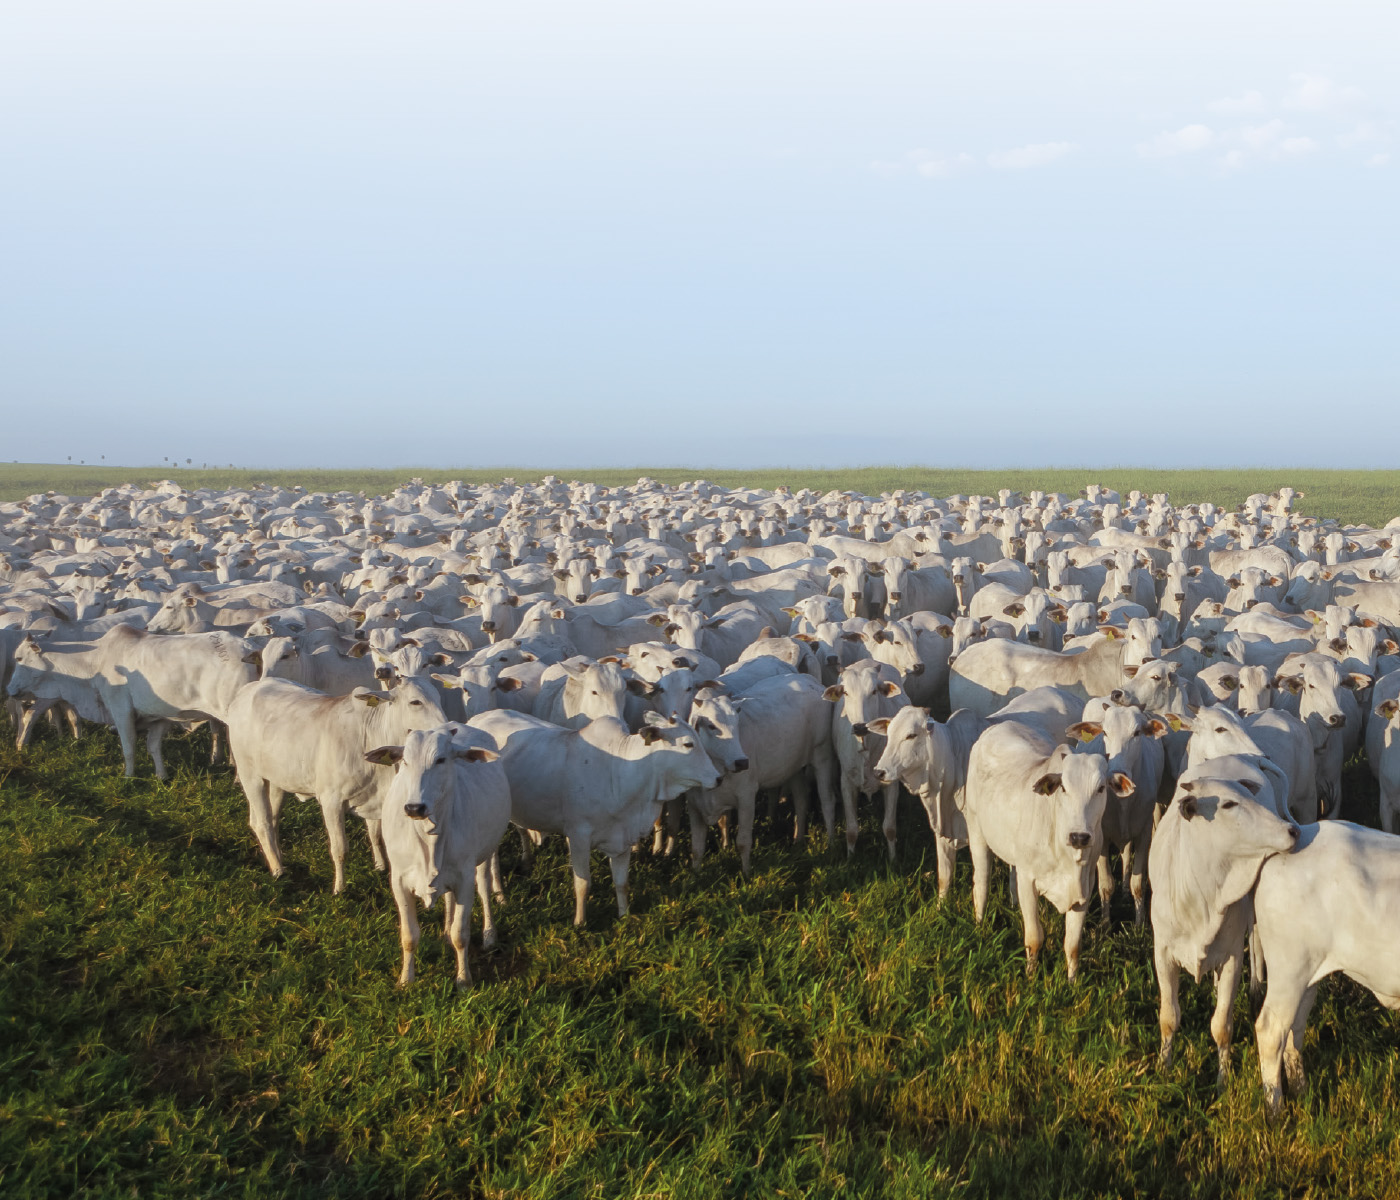 Livestock as a mitigating agent for greenhouse gas emissions